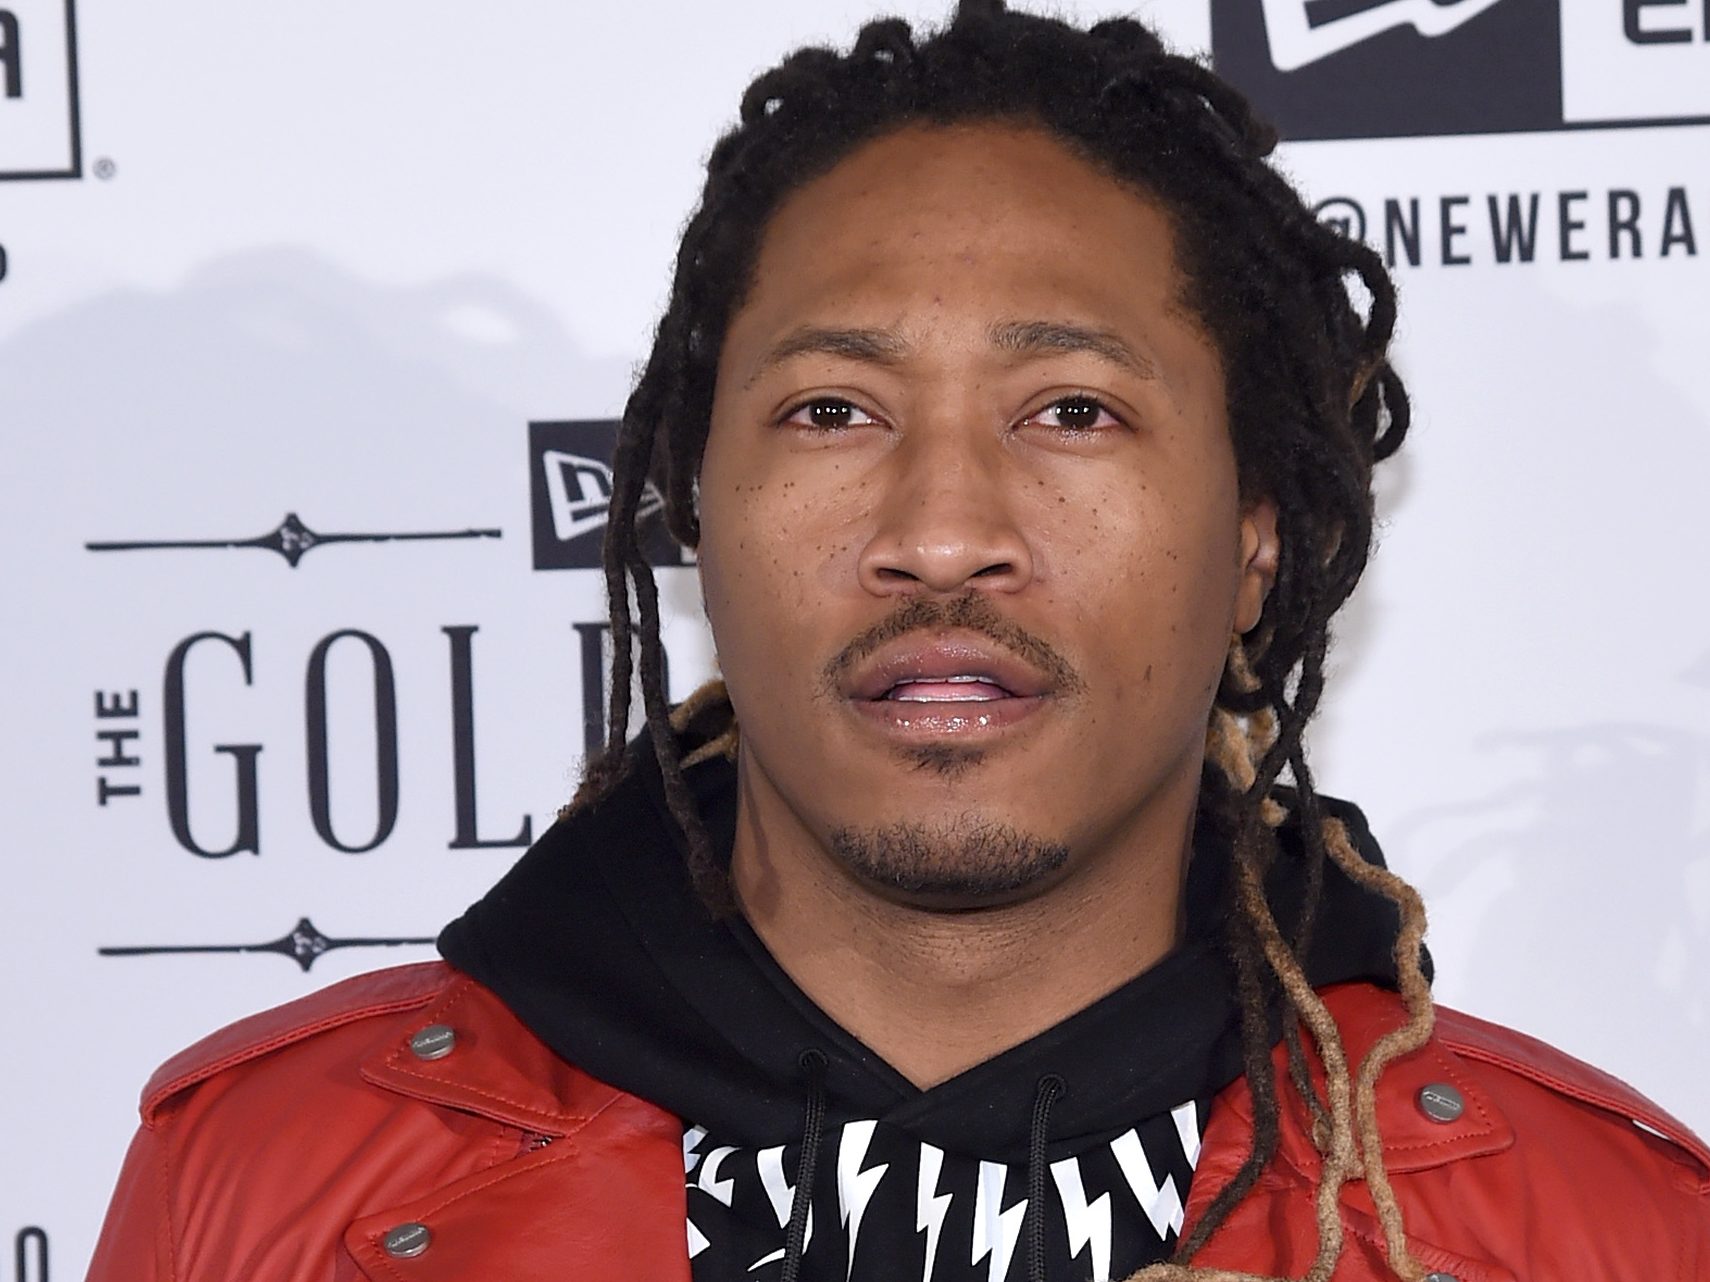 Rapper Future accused of offering 'hush money' to alleged baby mama - torontosun.com - Texas